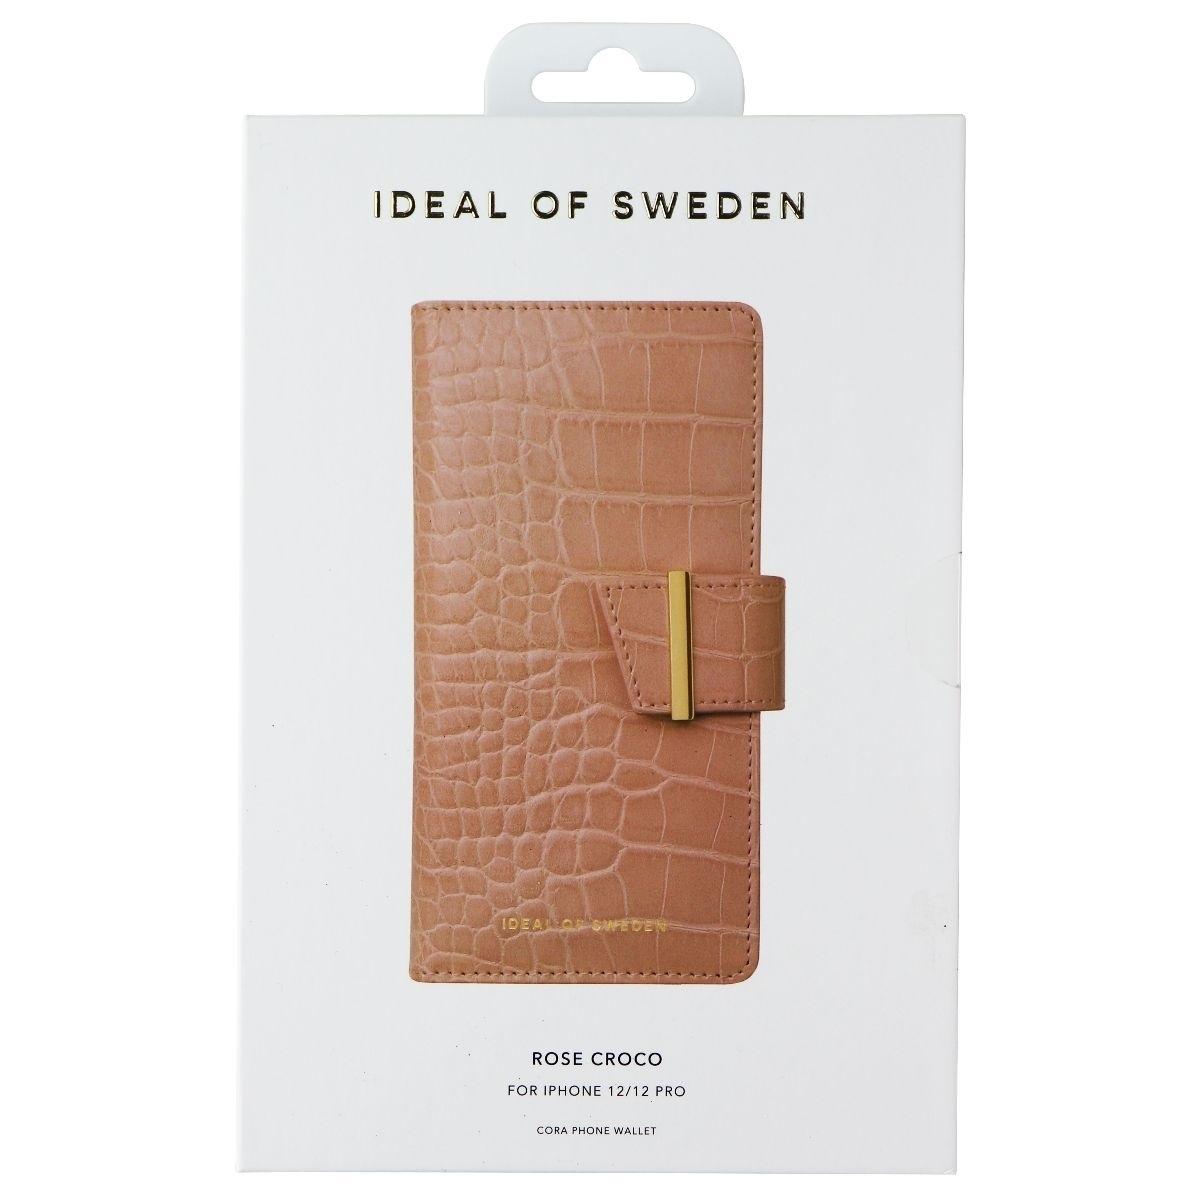 IDeal Of Sweden Phone Wallet Case For Apple IPhone 12 And 12 Pro - Rose Croco